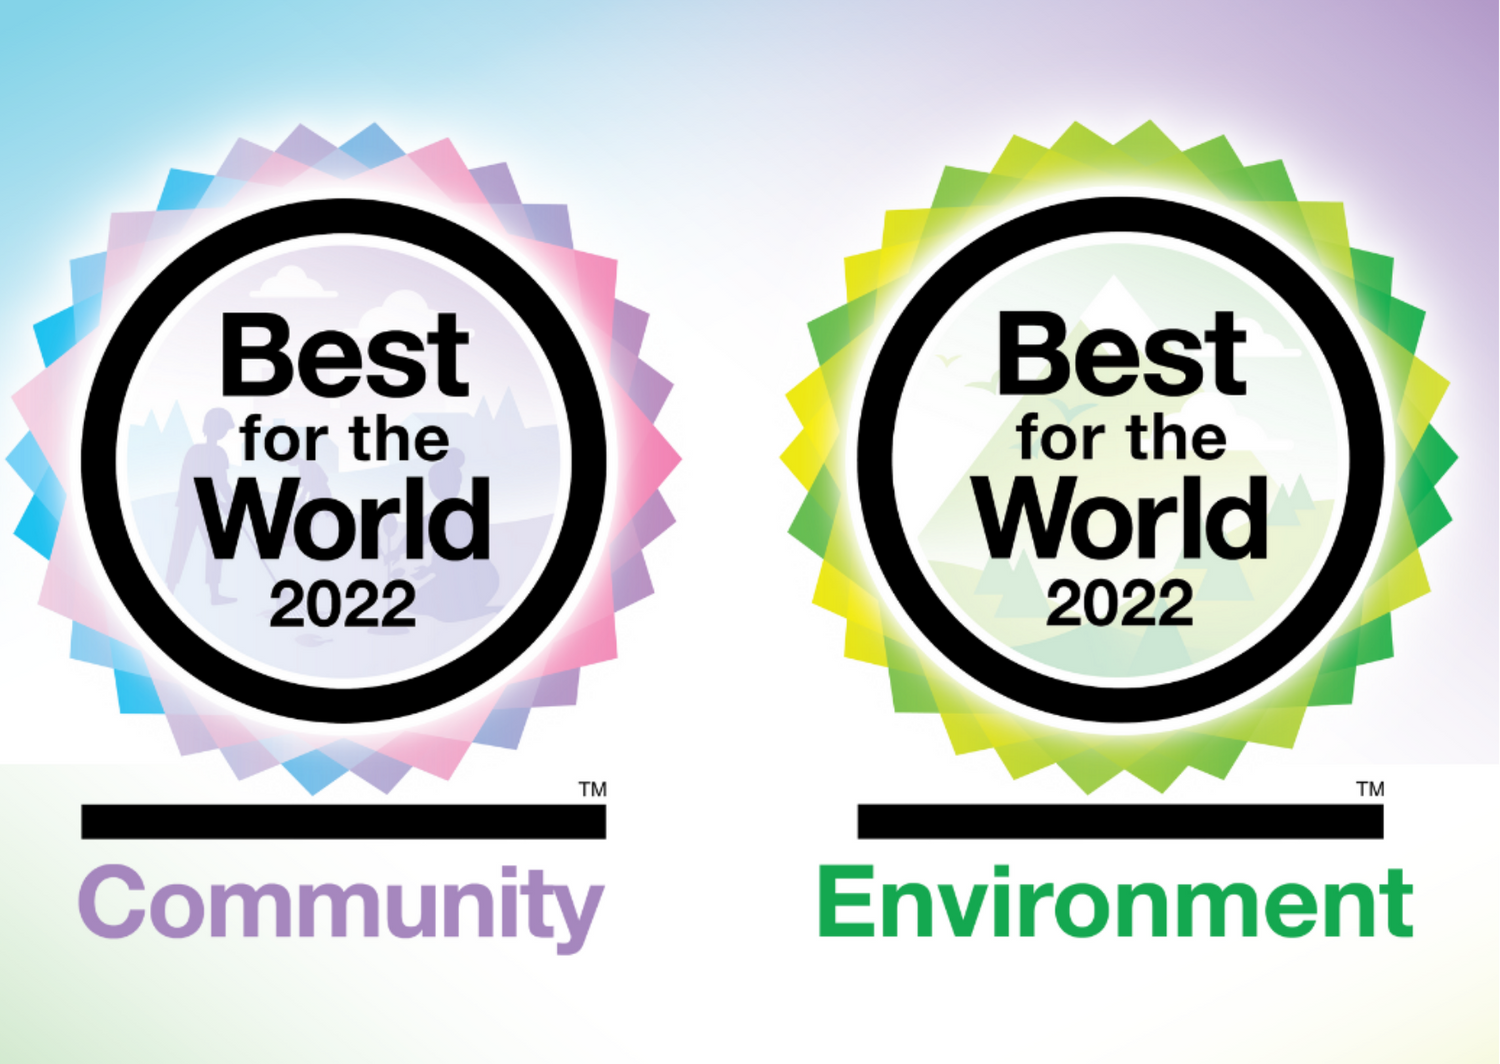 B Corp Community and Environment badges